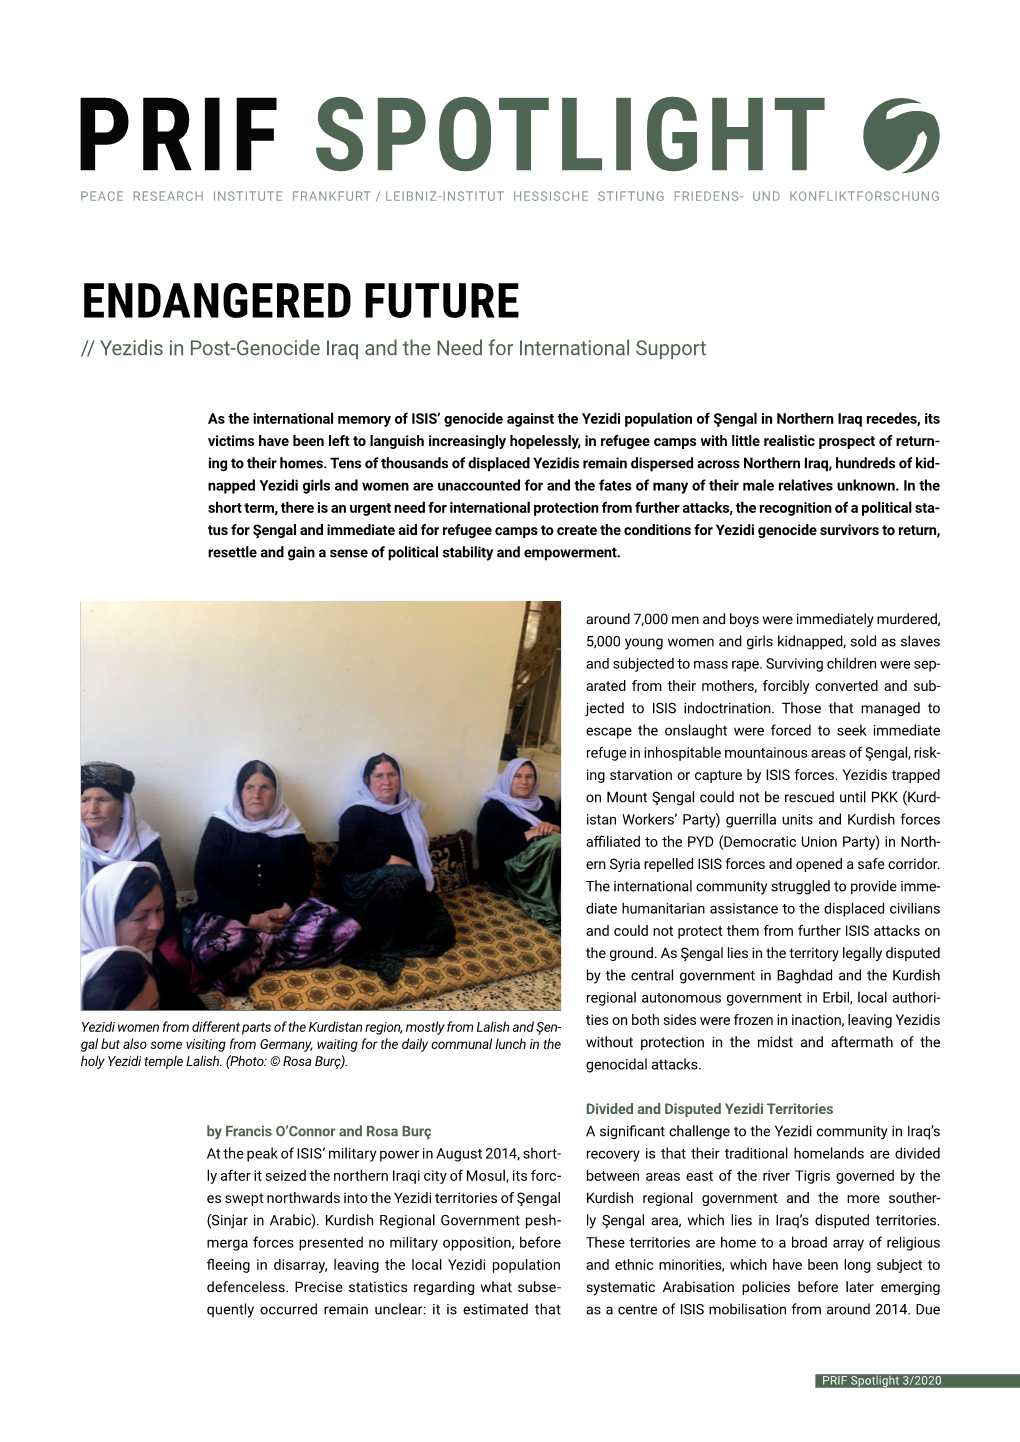 Endangered Future. Yezidis in Post-Genocide Iraq and the Need